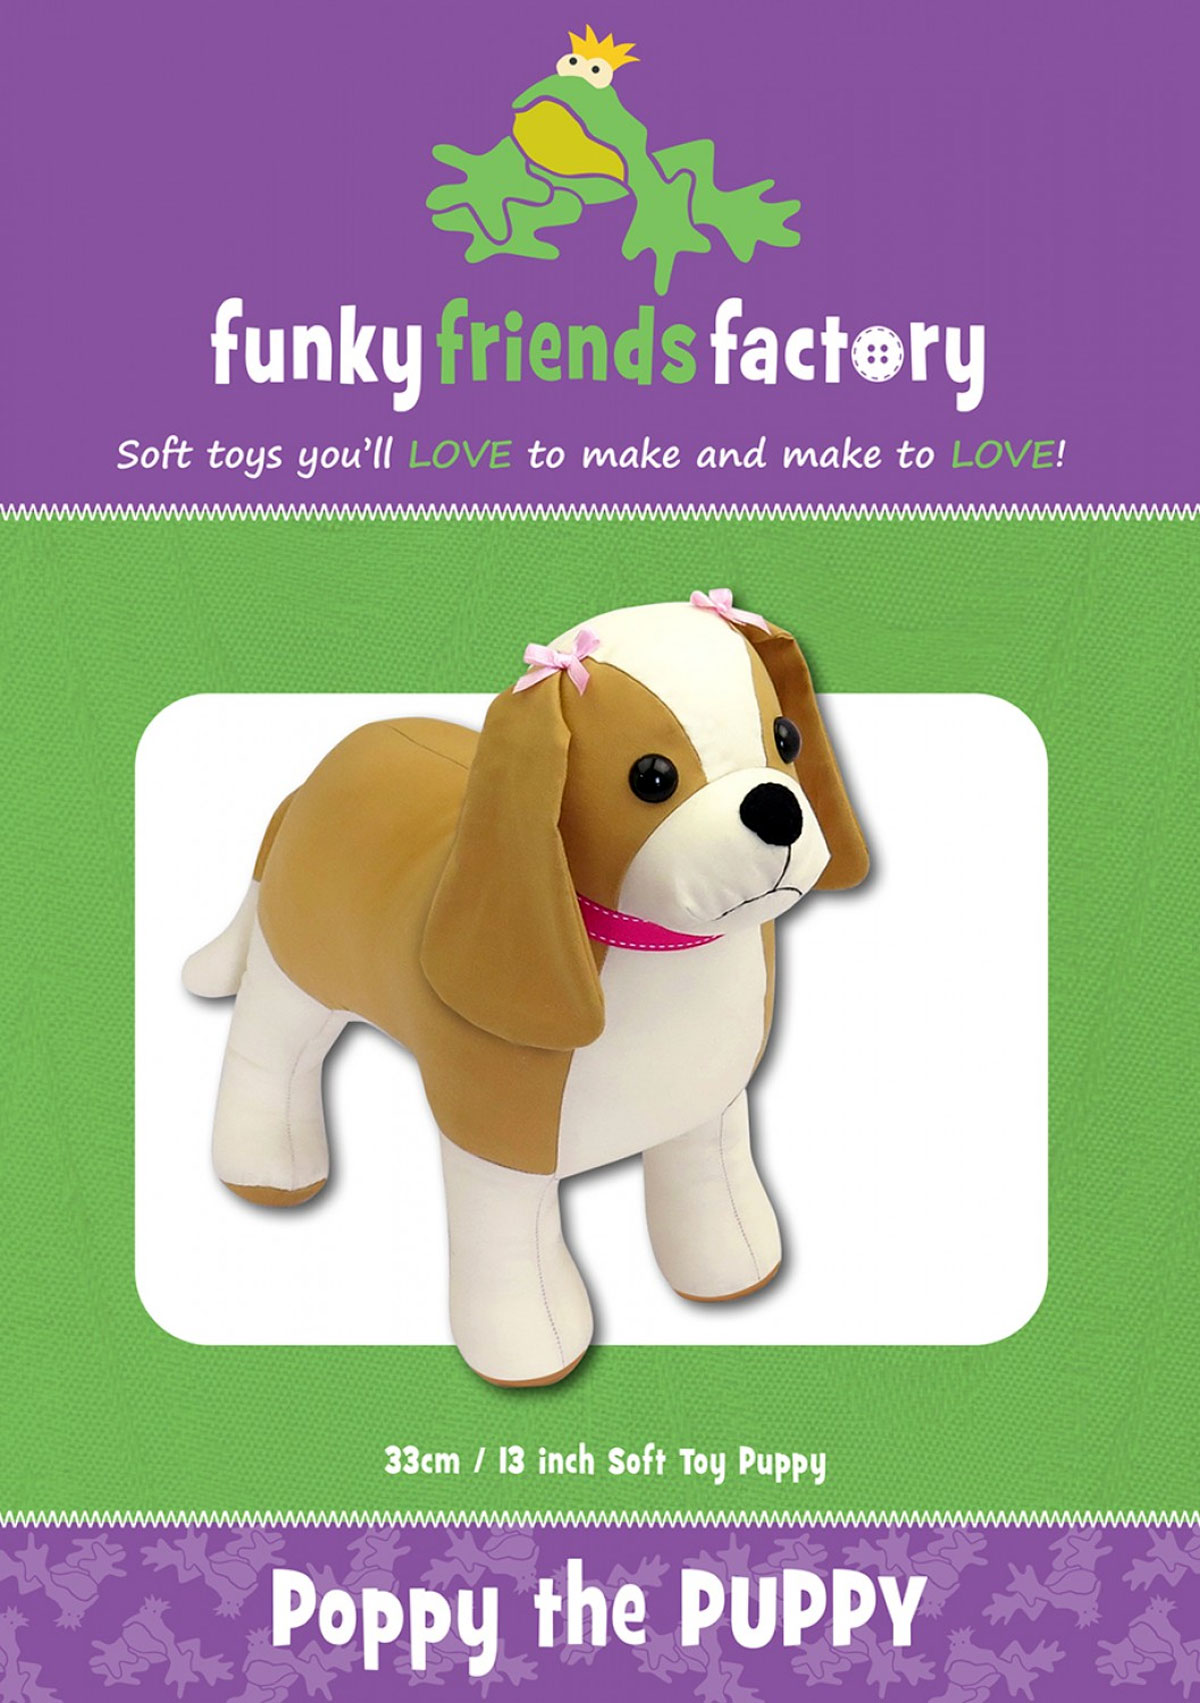 Poppy-the-Puppy-soft-toy-sewing-pattern-Funky-Friends-Factory-front